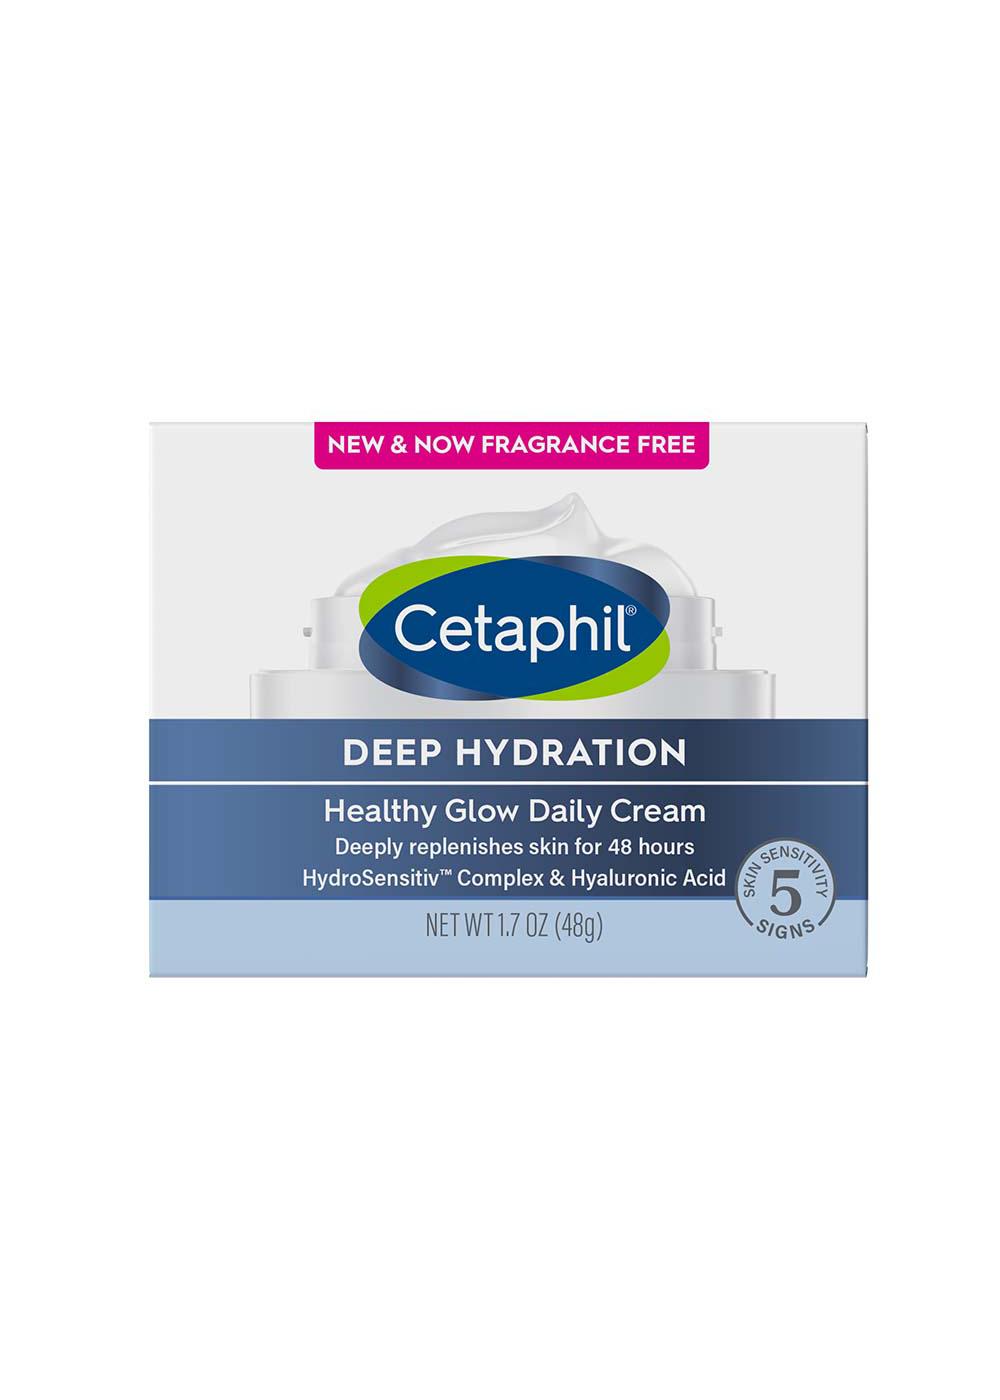 Cetaphil Deep Hydration Healthy Glow Daily Cream; image 1 of 8